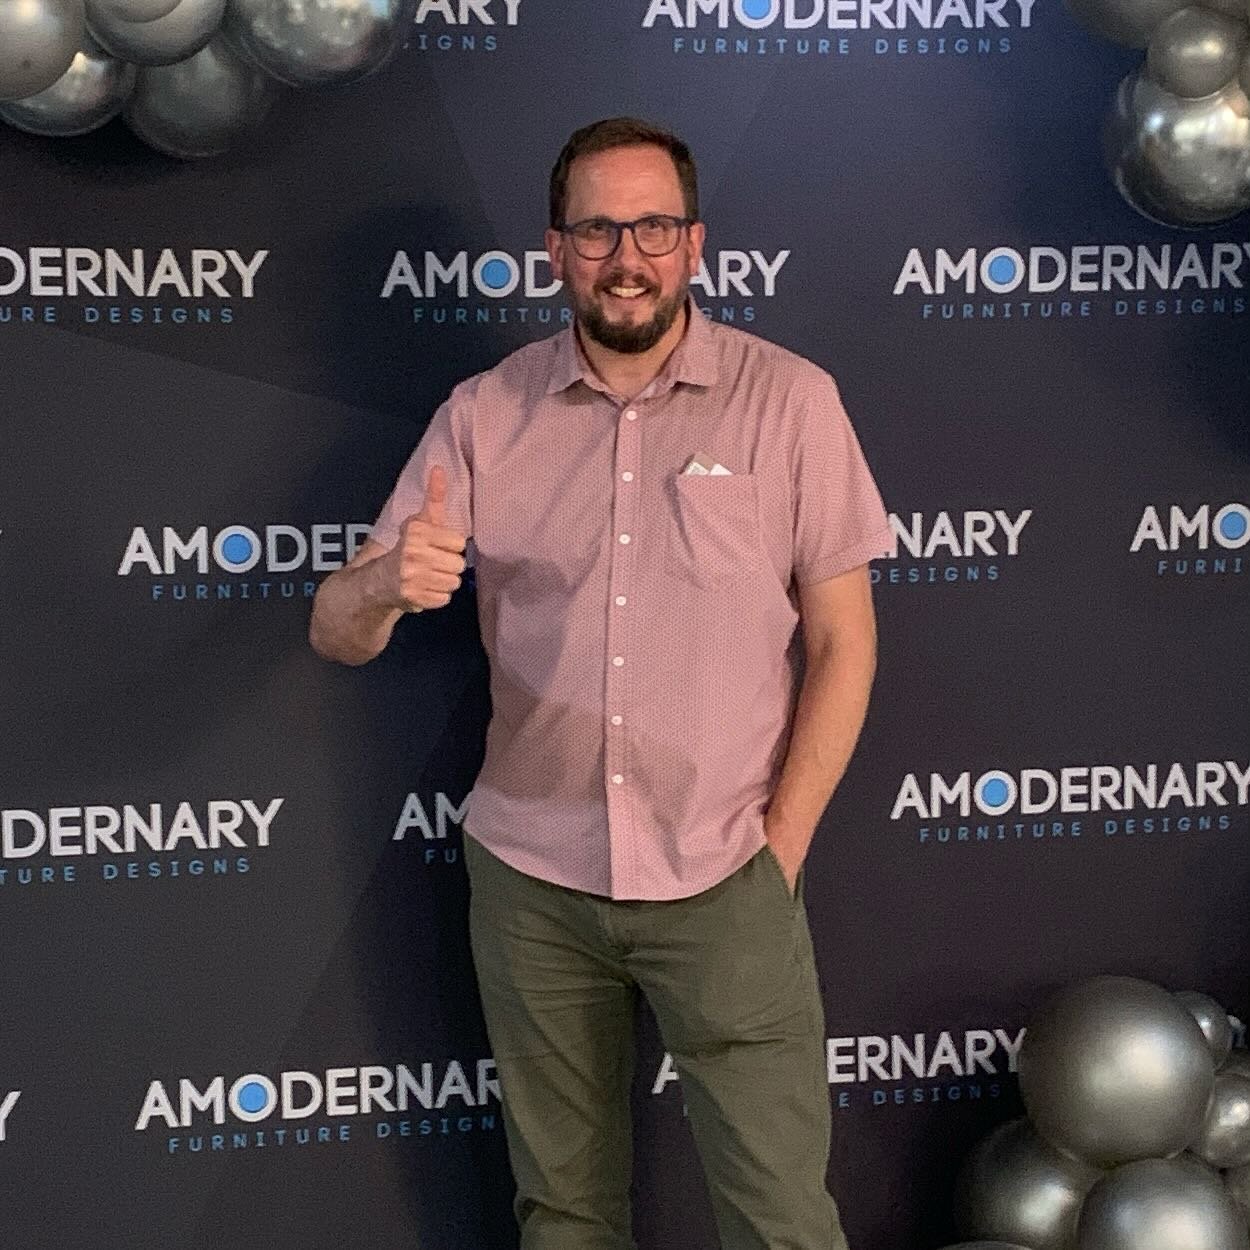 We are ecstatic to see @amodernary in their brand spanking new showroom in Charlotte - if you need high-end, modern furnishings, you GOT to stop by! Time to live in style! We had a blast during the opening! Thank you @mr.amodernary and @tiffany_at_af